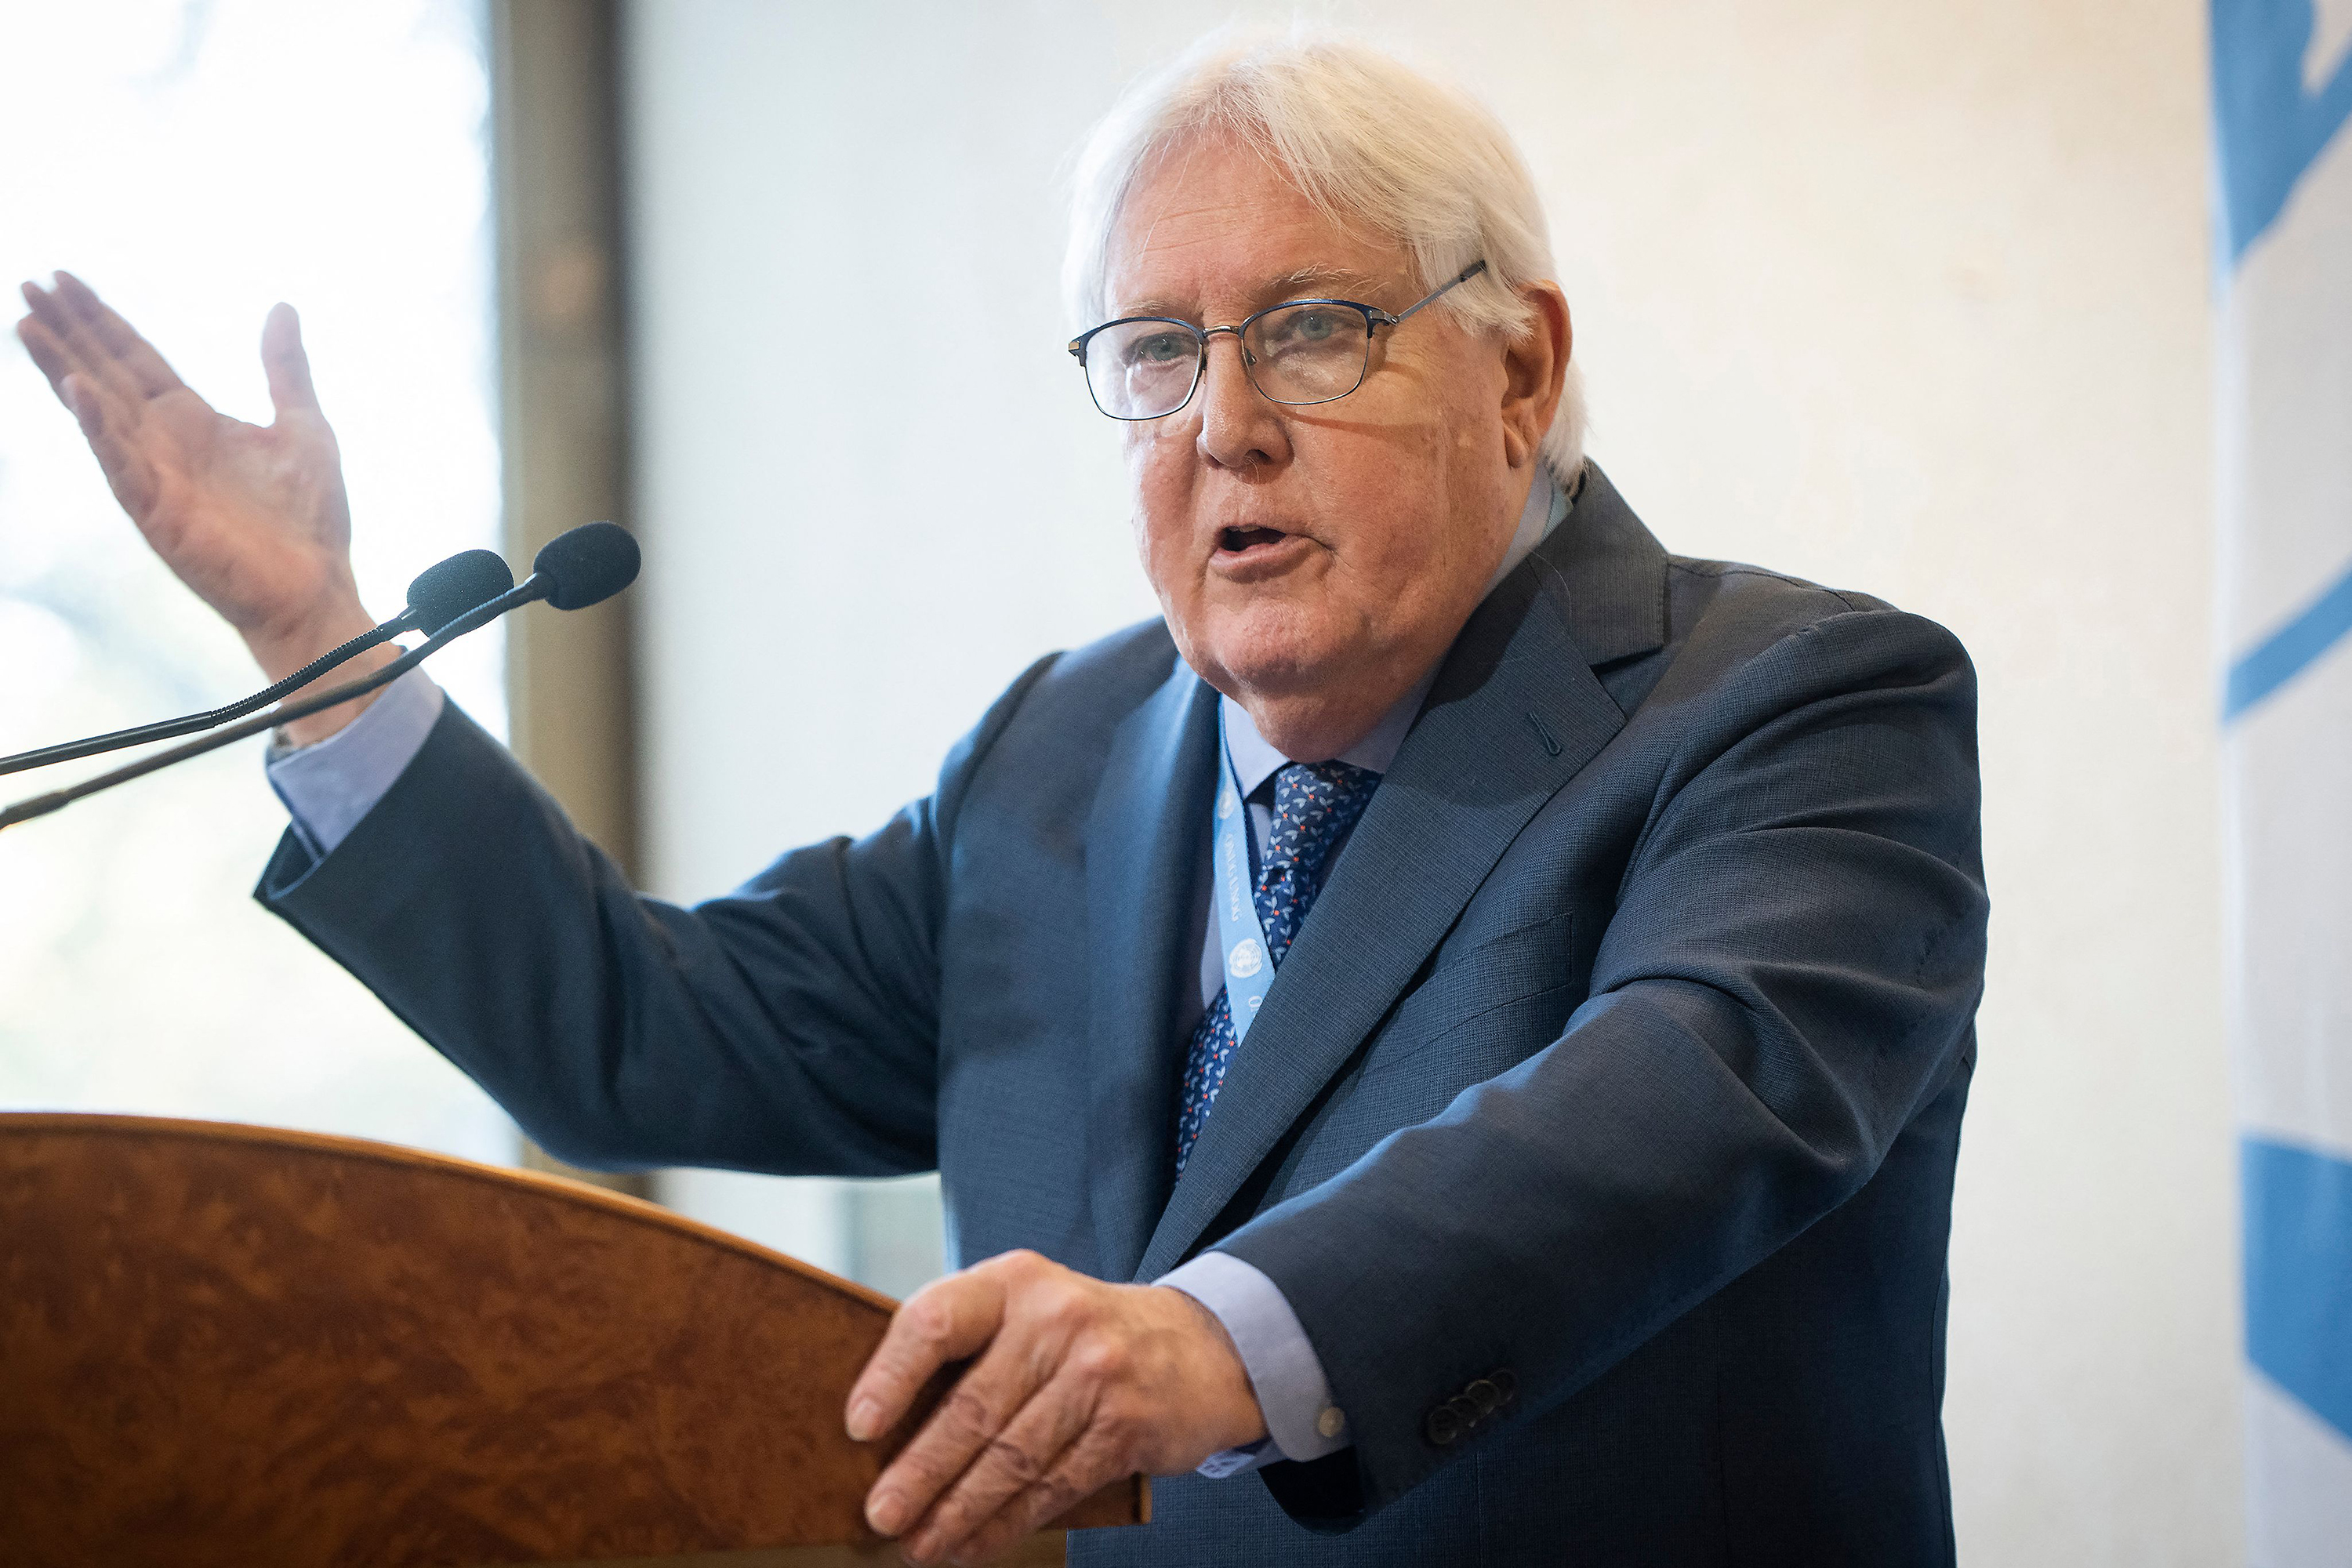 The United Nations relief chief Martin Griffiths speaks during a press conference on the situation in Gaza, at UN Building in Geneva, on November 15.